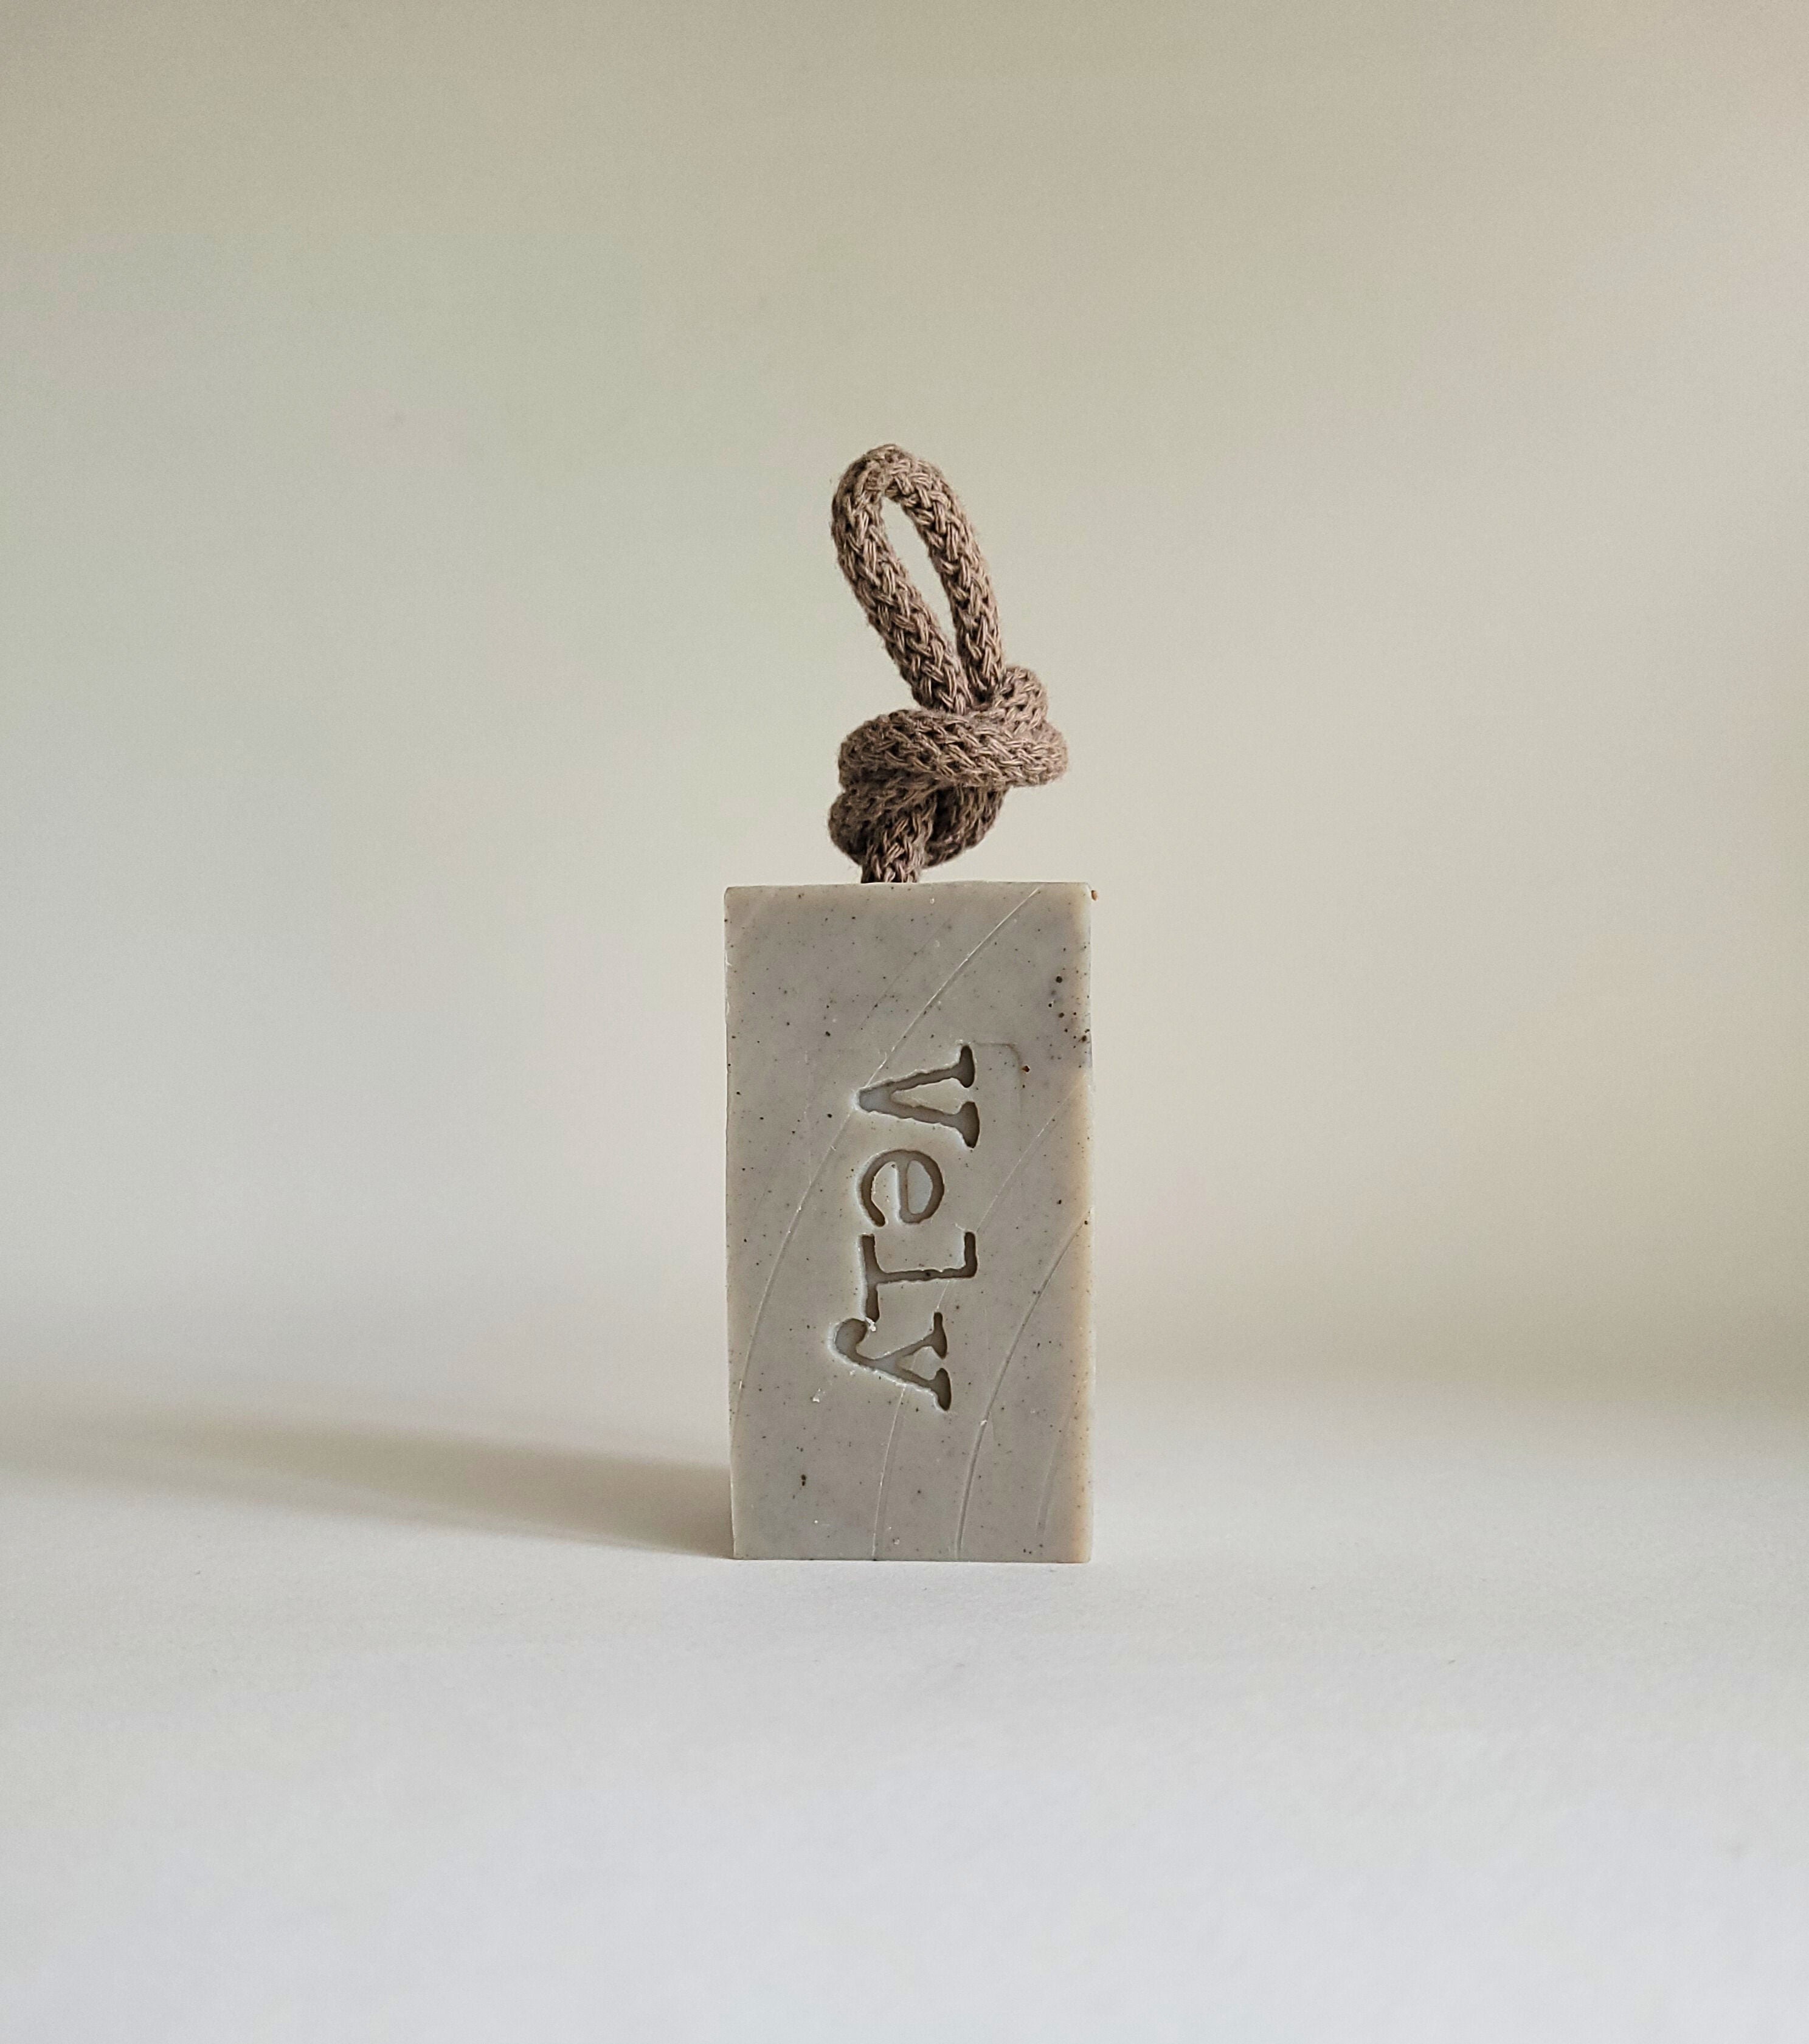 Natural Vegan Soap On A Rope With Dead Sea Clay "Sea Meditation"